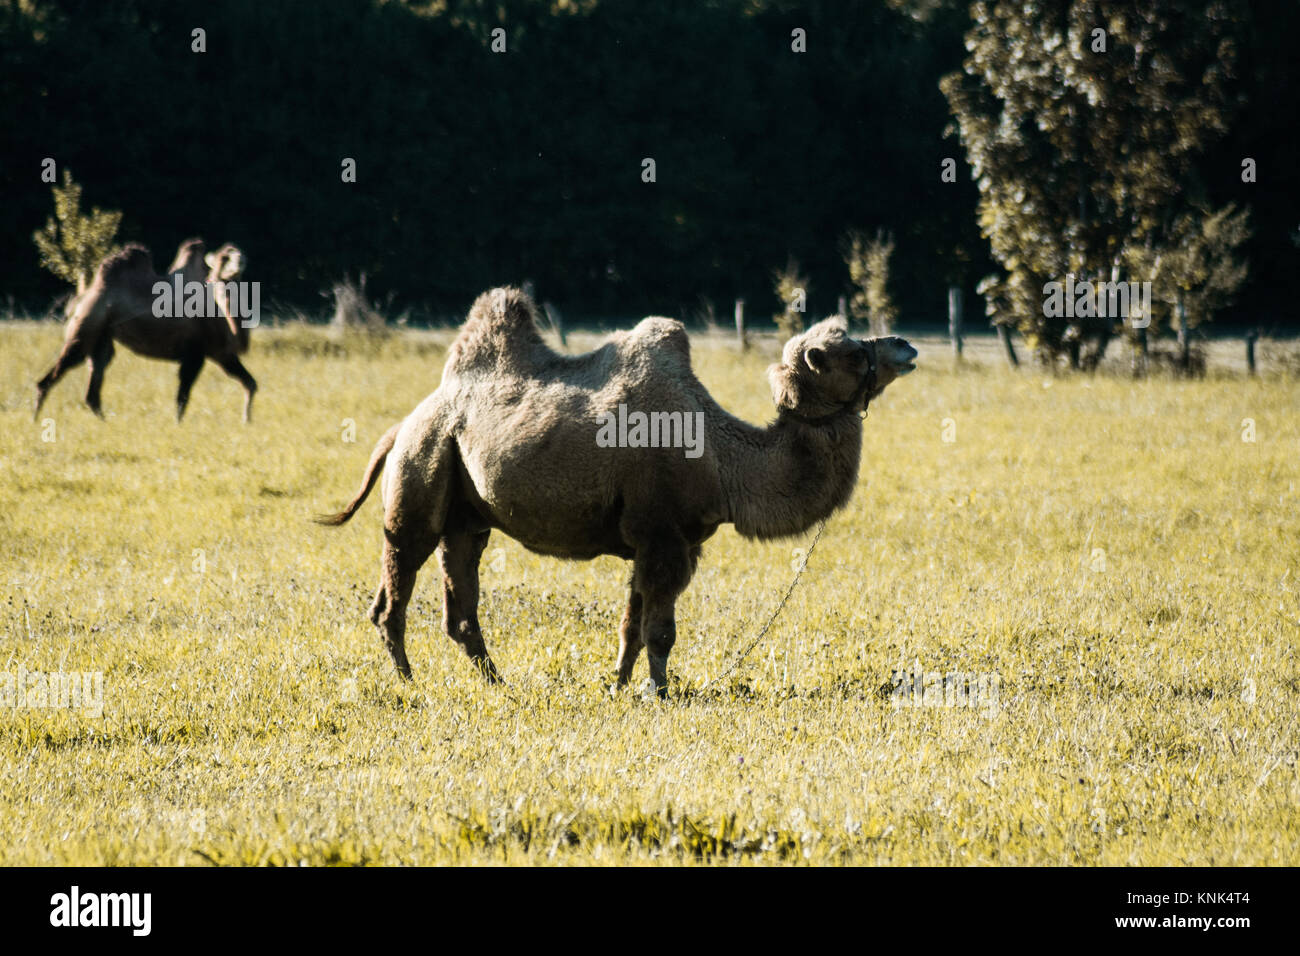 A beautiful camel in a field in the swiss alps for a circus show Stock Photo